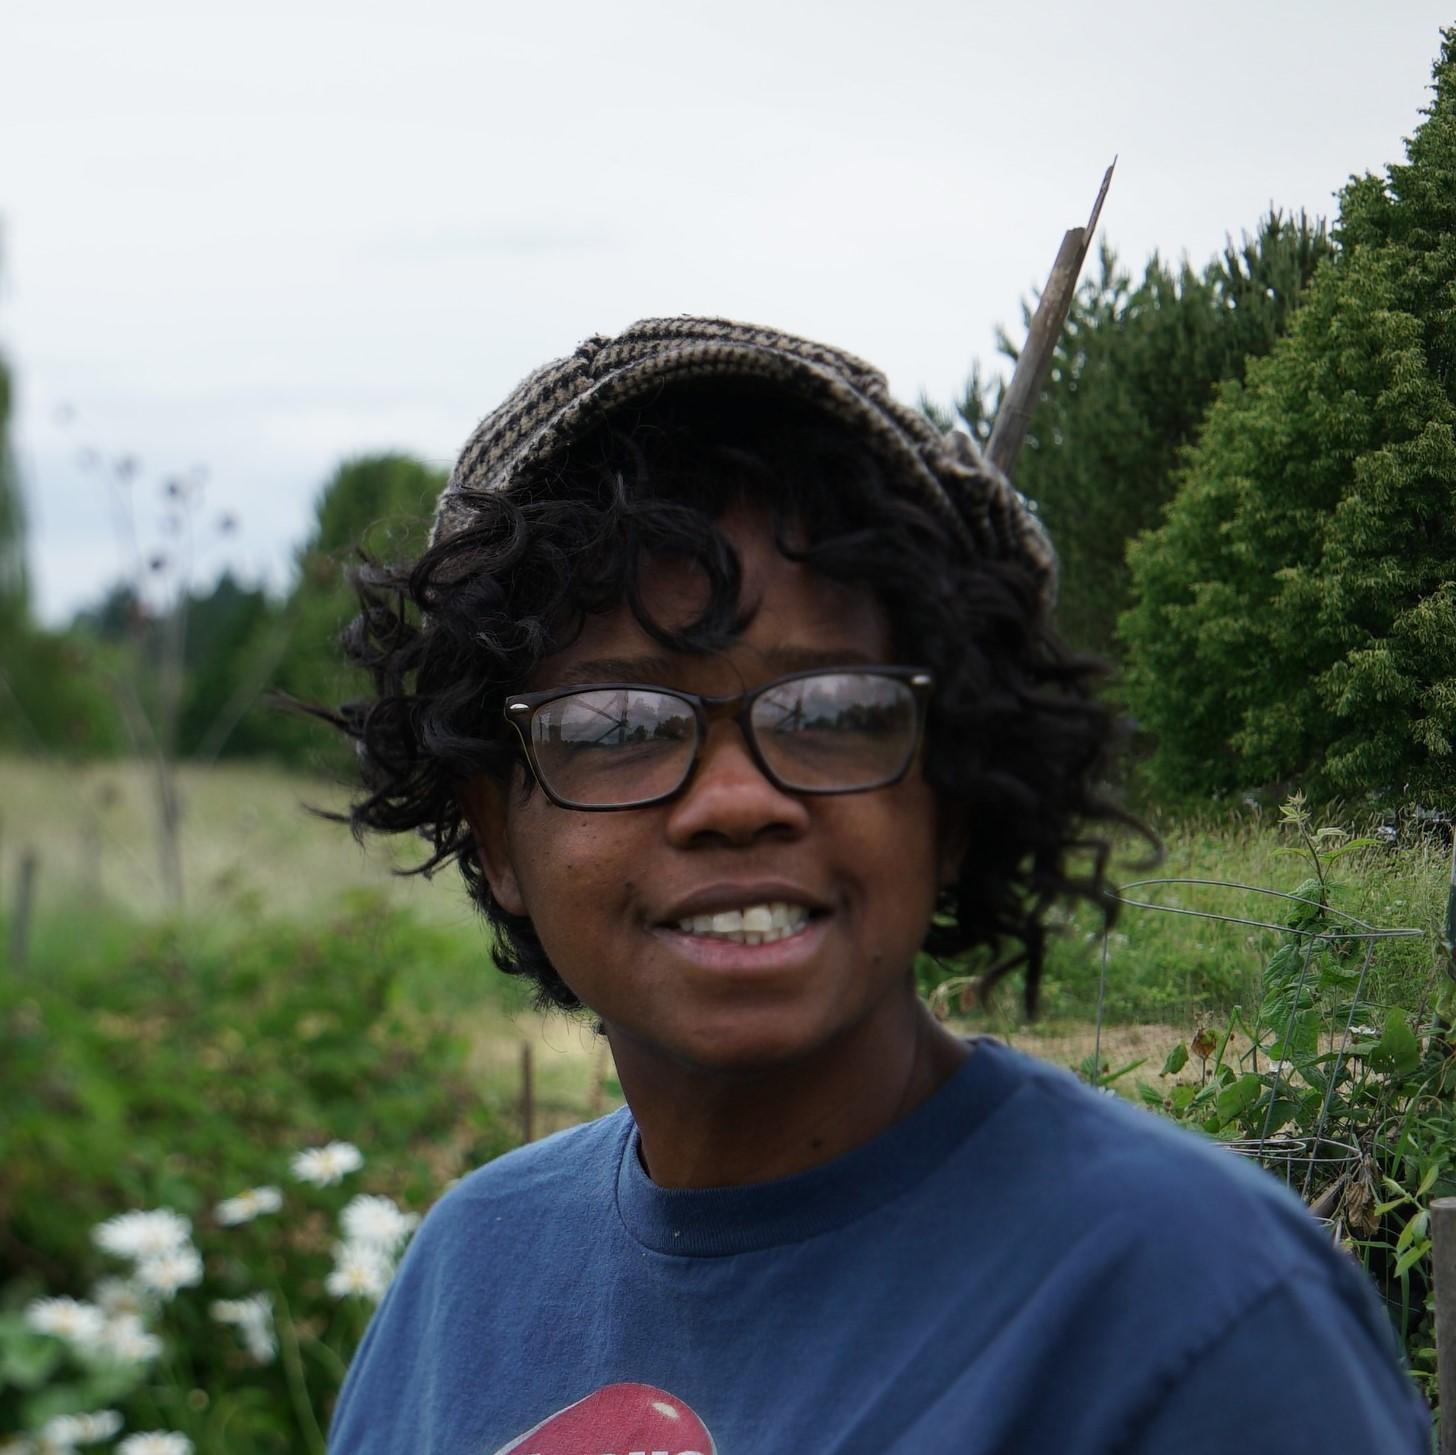 Smiling woman with glasses and hat in a garden.